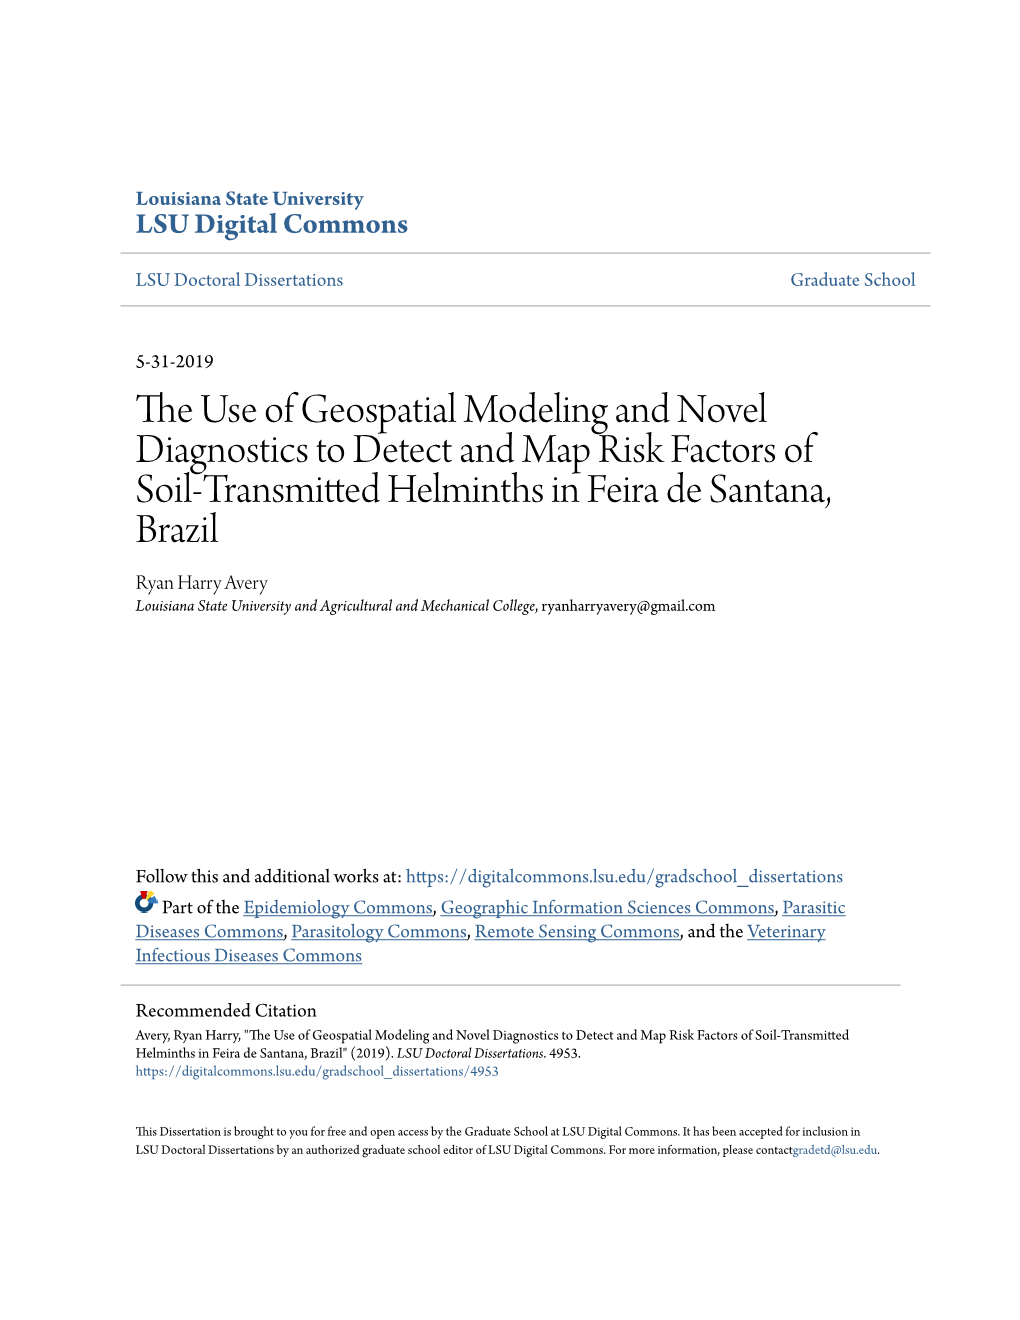 The Use of Geospatial Modeling and Novel Diagnostics to Detect And